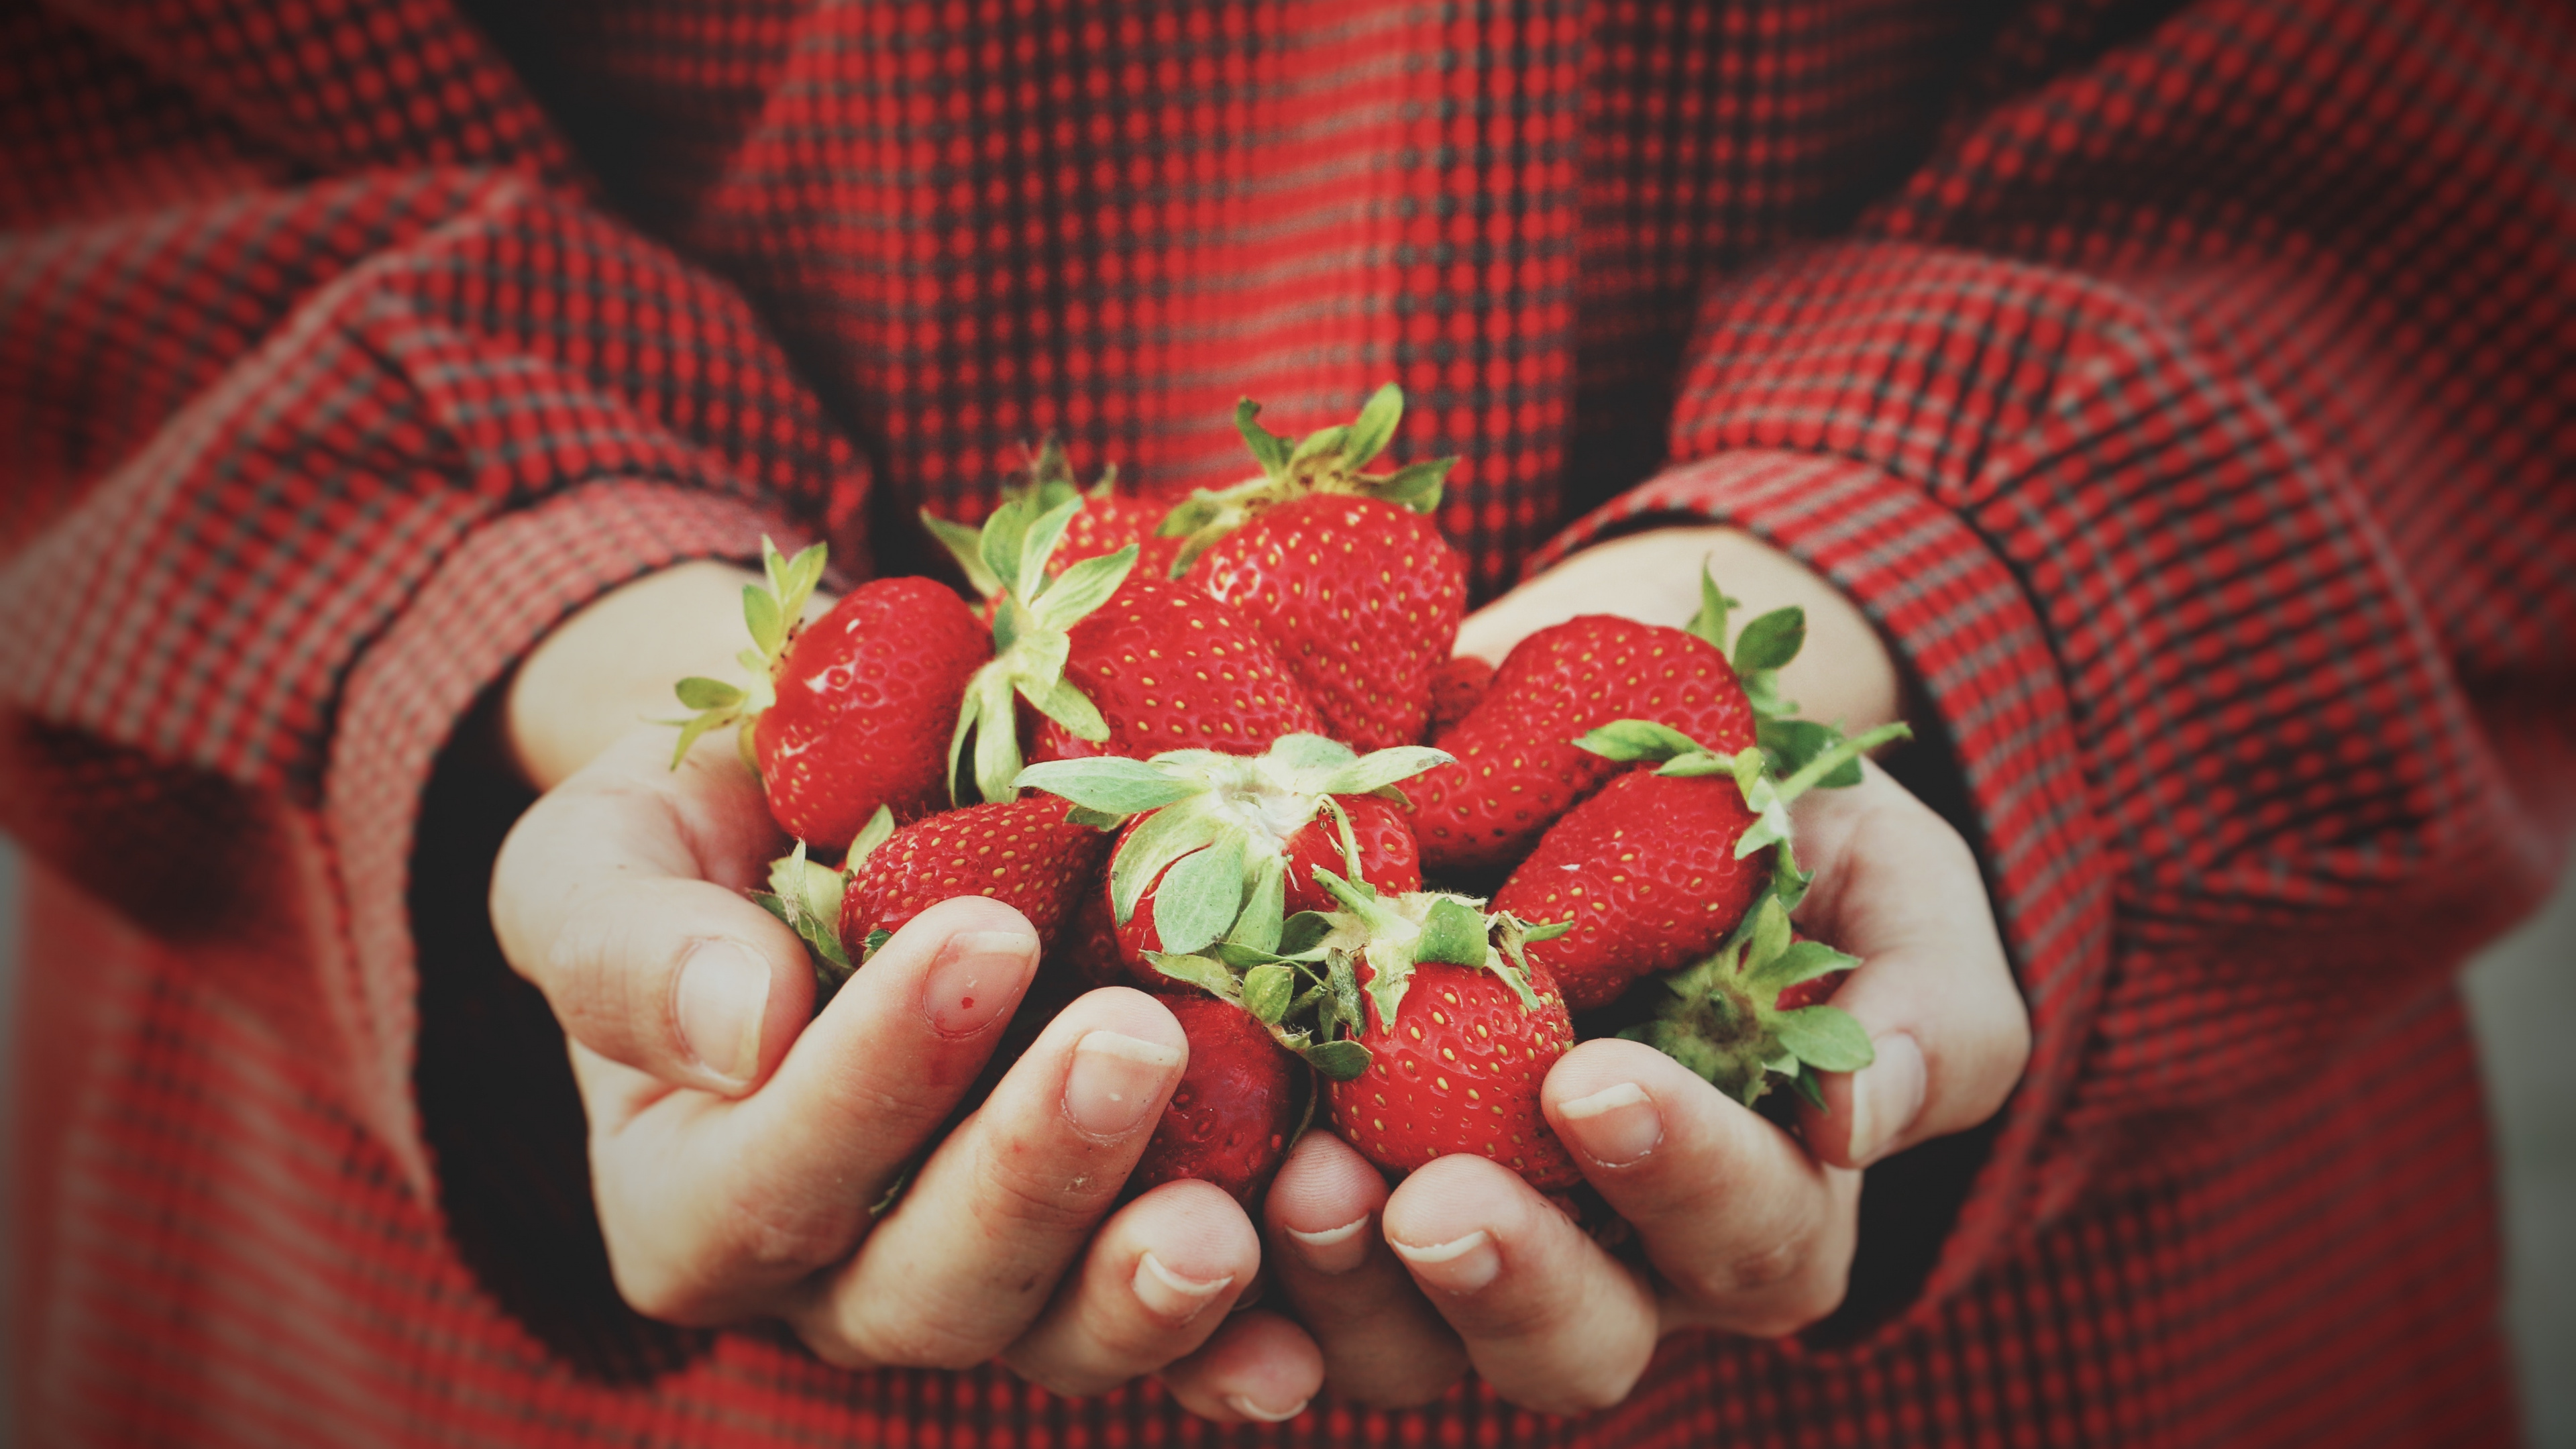 Person Holding Strawberries on Hand. Wallpaper in 3840x2160 Resolution